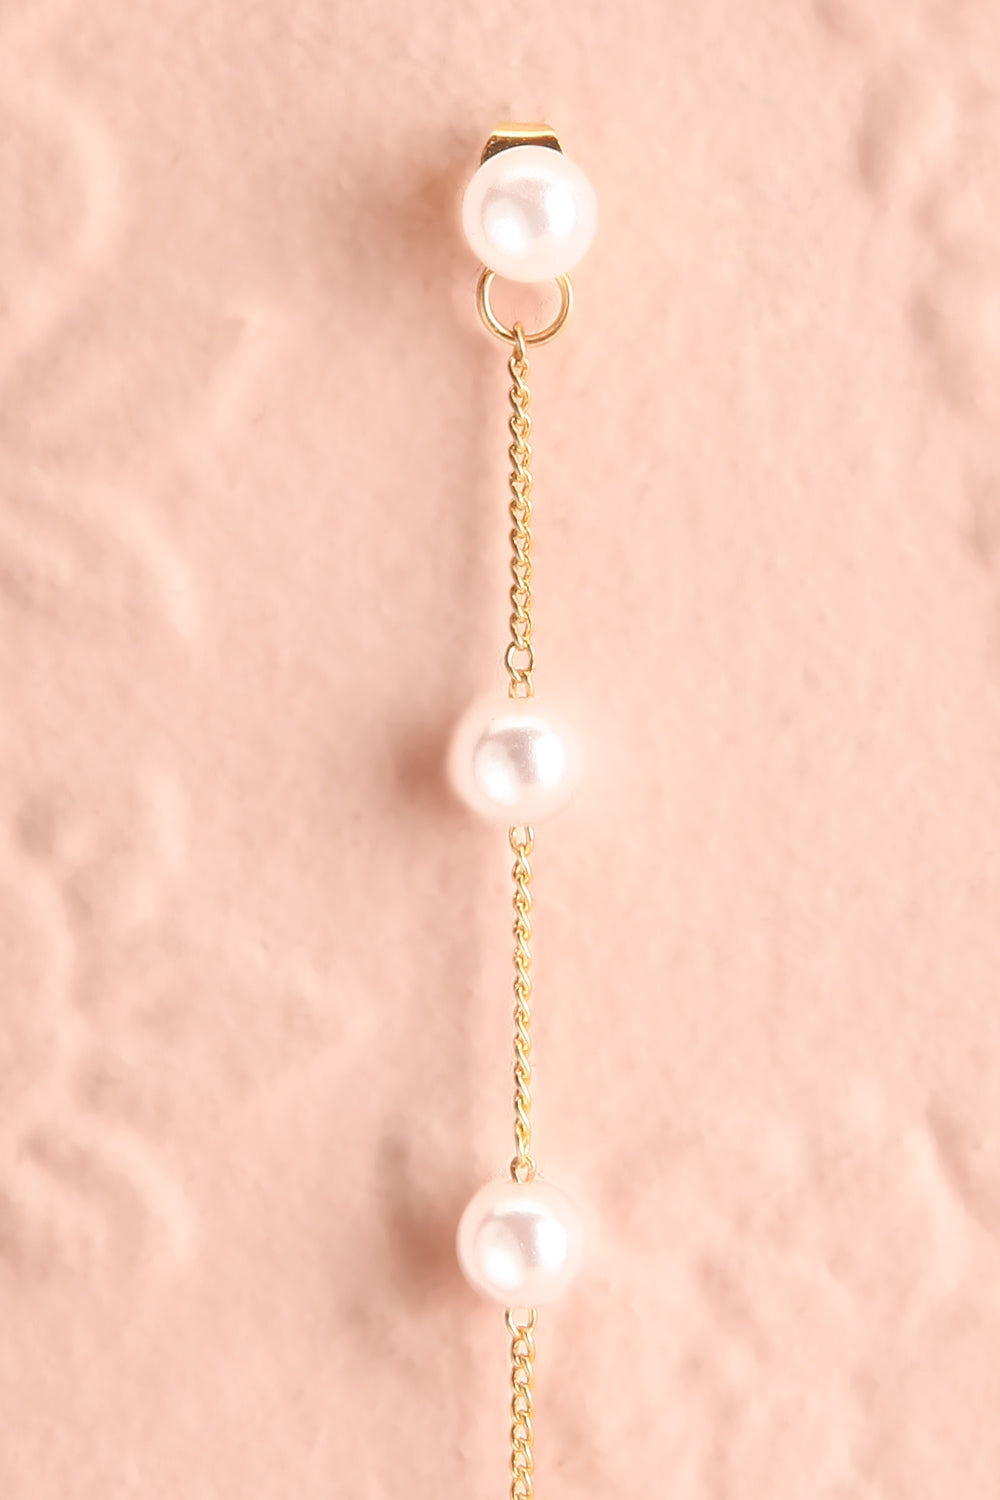 Astraea Pearl Earrings w/ Pendant Backing | Boutique 1861 close-up